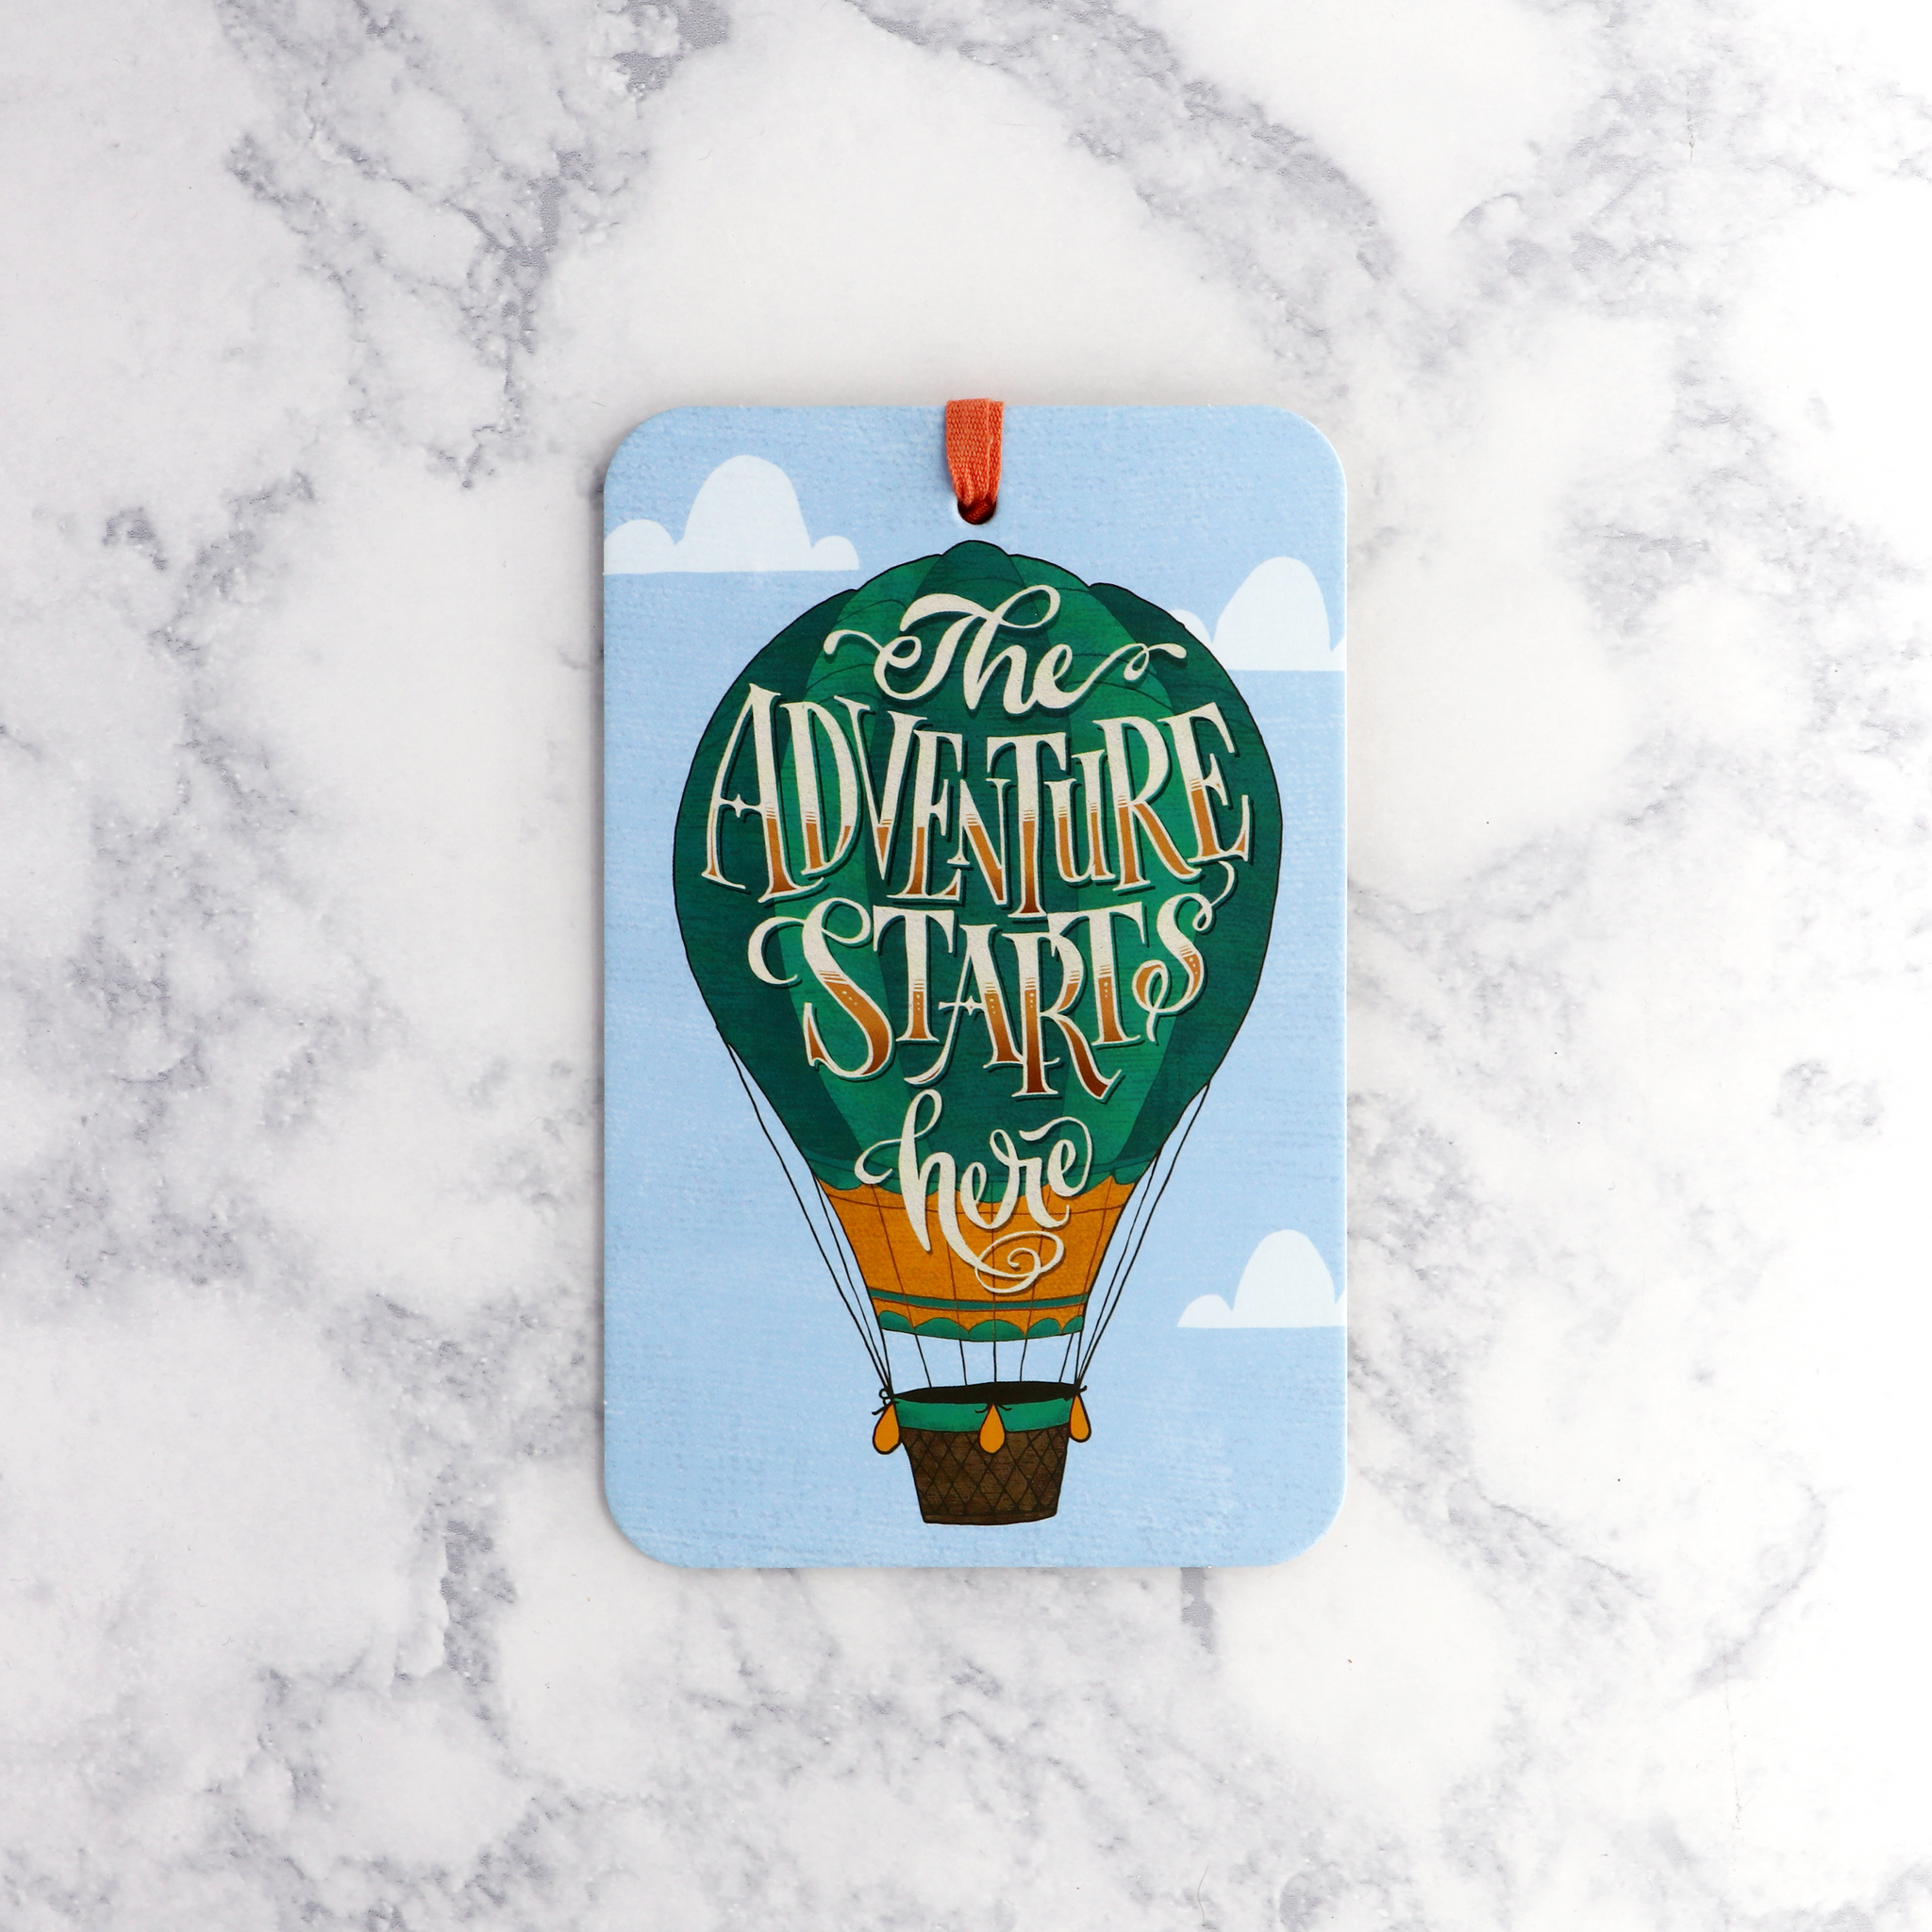 "The Adventure Starts Here" Gift Tag